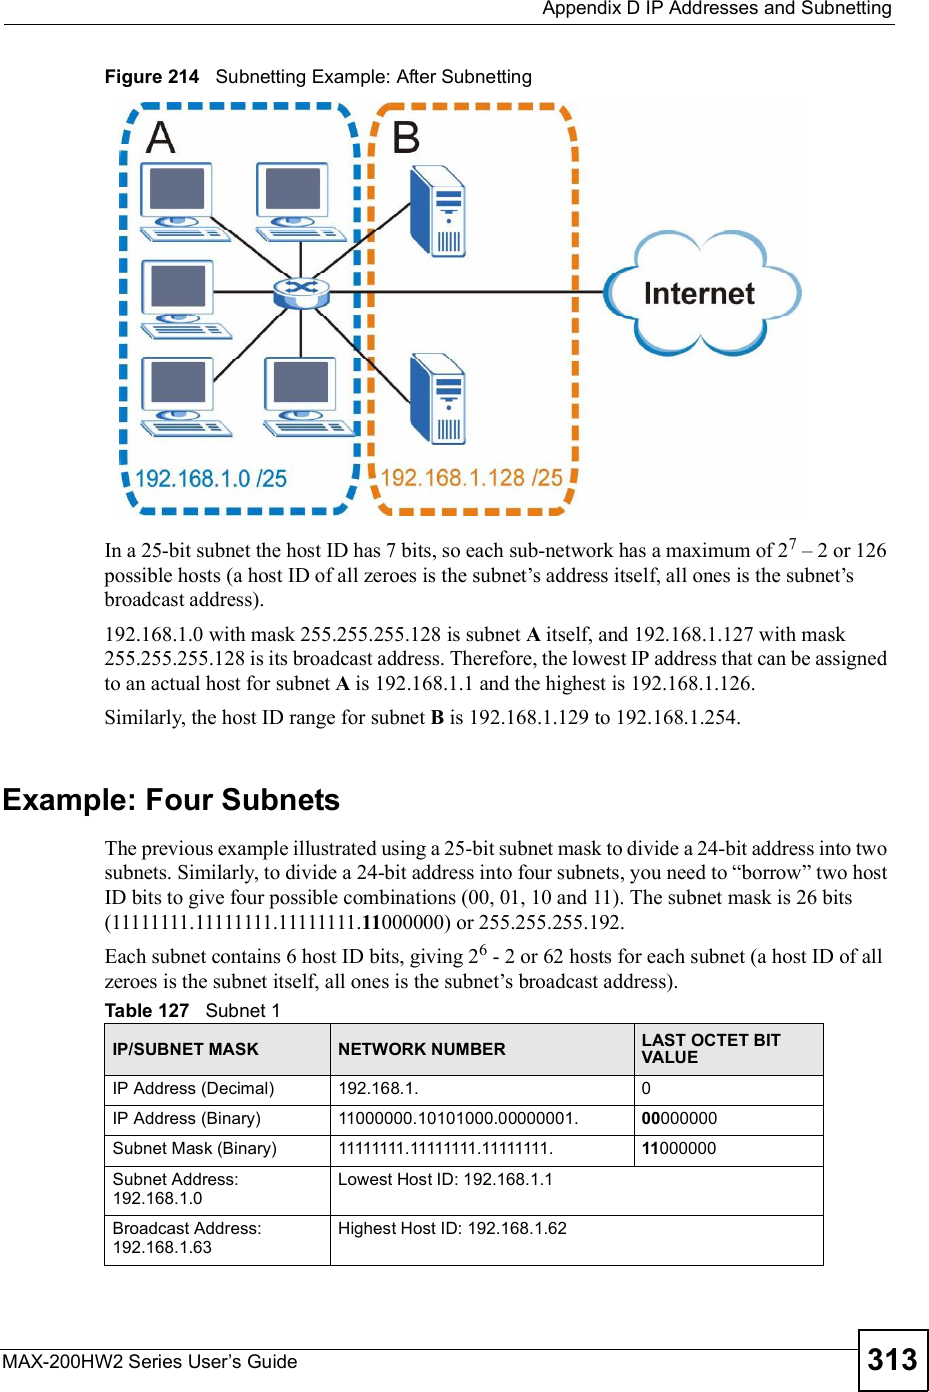  Appendix DIP Addresses and SubnettingMAX-200HW2 Series User s Guide 313Figure 214   Subnetting Example: After SubnettingIn a 25-bit subnet the host ID has 7 bits, so each sub-network has a maximum of 27 % 2 or 126 possible hosts (a host ID of all zeroes is the subnet!s address itself, all ones is the subnet!s broadcast address).192.168.1.0 with mask 255.255.255.128 is subnet A itself, and 192.168.1.127 with mask 255.255.255.128 is its broadcast address. Therefore, the lowest IP address that can be assigned to an actual host for subnet A is 192.168.1.1 and the highest is 192.168.1.126. Similarly, the host ID range for subnet B is 192.168.1.129 to 192.168.1.254.Example: Four Subnets The previous example illustrated using a 25-bit subnet mask to divide a 24-bit address into two subnets. Similarly, to divide a 24-bit address into four subnets, you need to &quot;borrow# two host ID bits to give four possible combinations (00, 01, 10 and 11). The subnet mask is 26 bits (11111111.11111111.11111111.11000000) or 255.255.255.192. Each subnet contains 6 host ID bits, giving 26 - 2 or 62 hosts for each subnet (a host ID of all zeroes is the subnet itself, all ones is the subnet!s broadcast address). Table 127   Subnet 1IP/SUBNET MASK NETWORK NUMBER LAST OCTET BIT VALUEIP Address (Decimal) 192.168.1. 0IP Address (Binary) 11000000.10101000.00000001. 00000000Subnet Mask (Binary) 11111111.11111111.11111111. 11000000Subnet Address: 192.168.1.0Lowest Host ID: 192.168.1.1Broadcast Address: 192.168.1.63Highest Host ID: 192.168.1.62